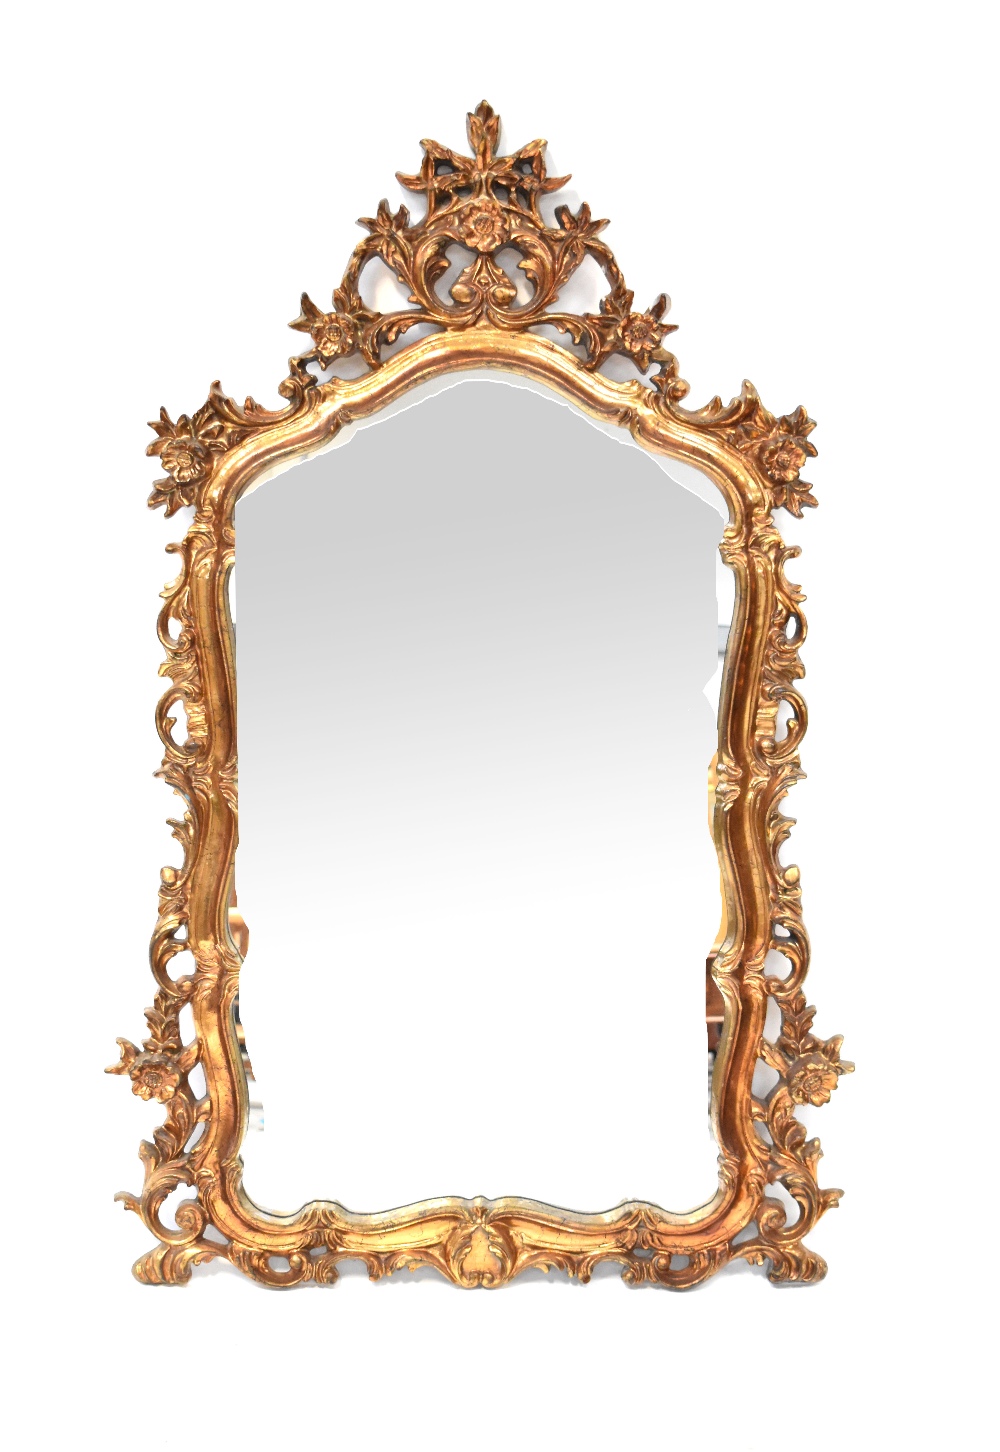 A Rococo-style gilt-framed mirror with shaped arched plate within pierced C-scroll and foliate